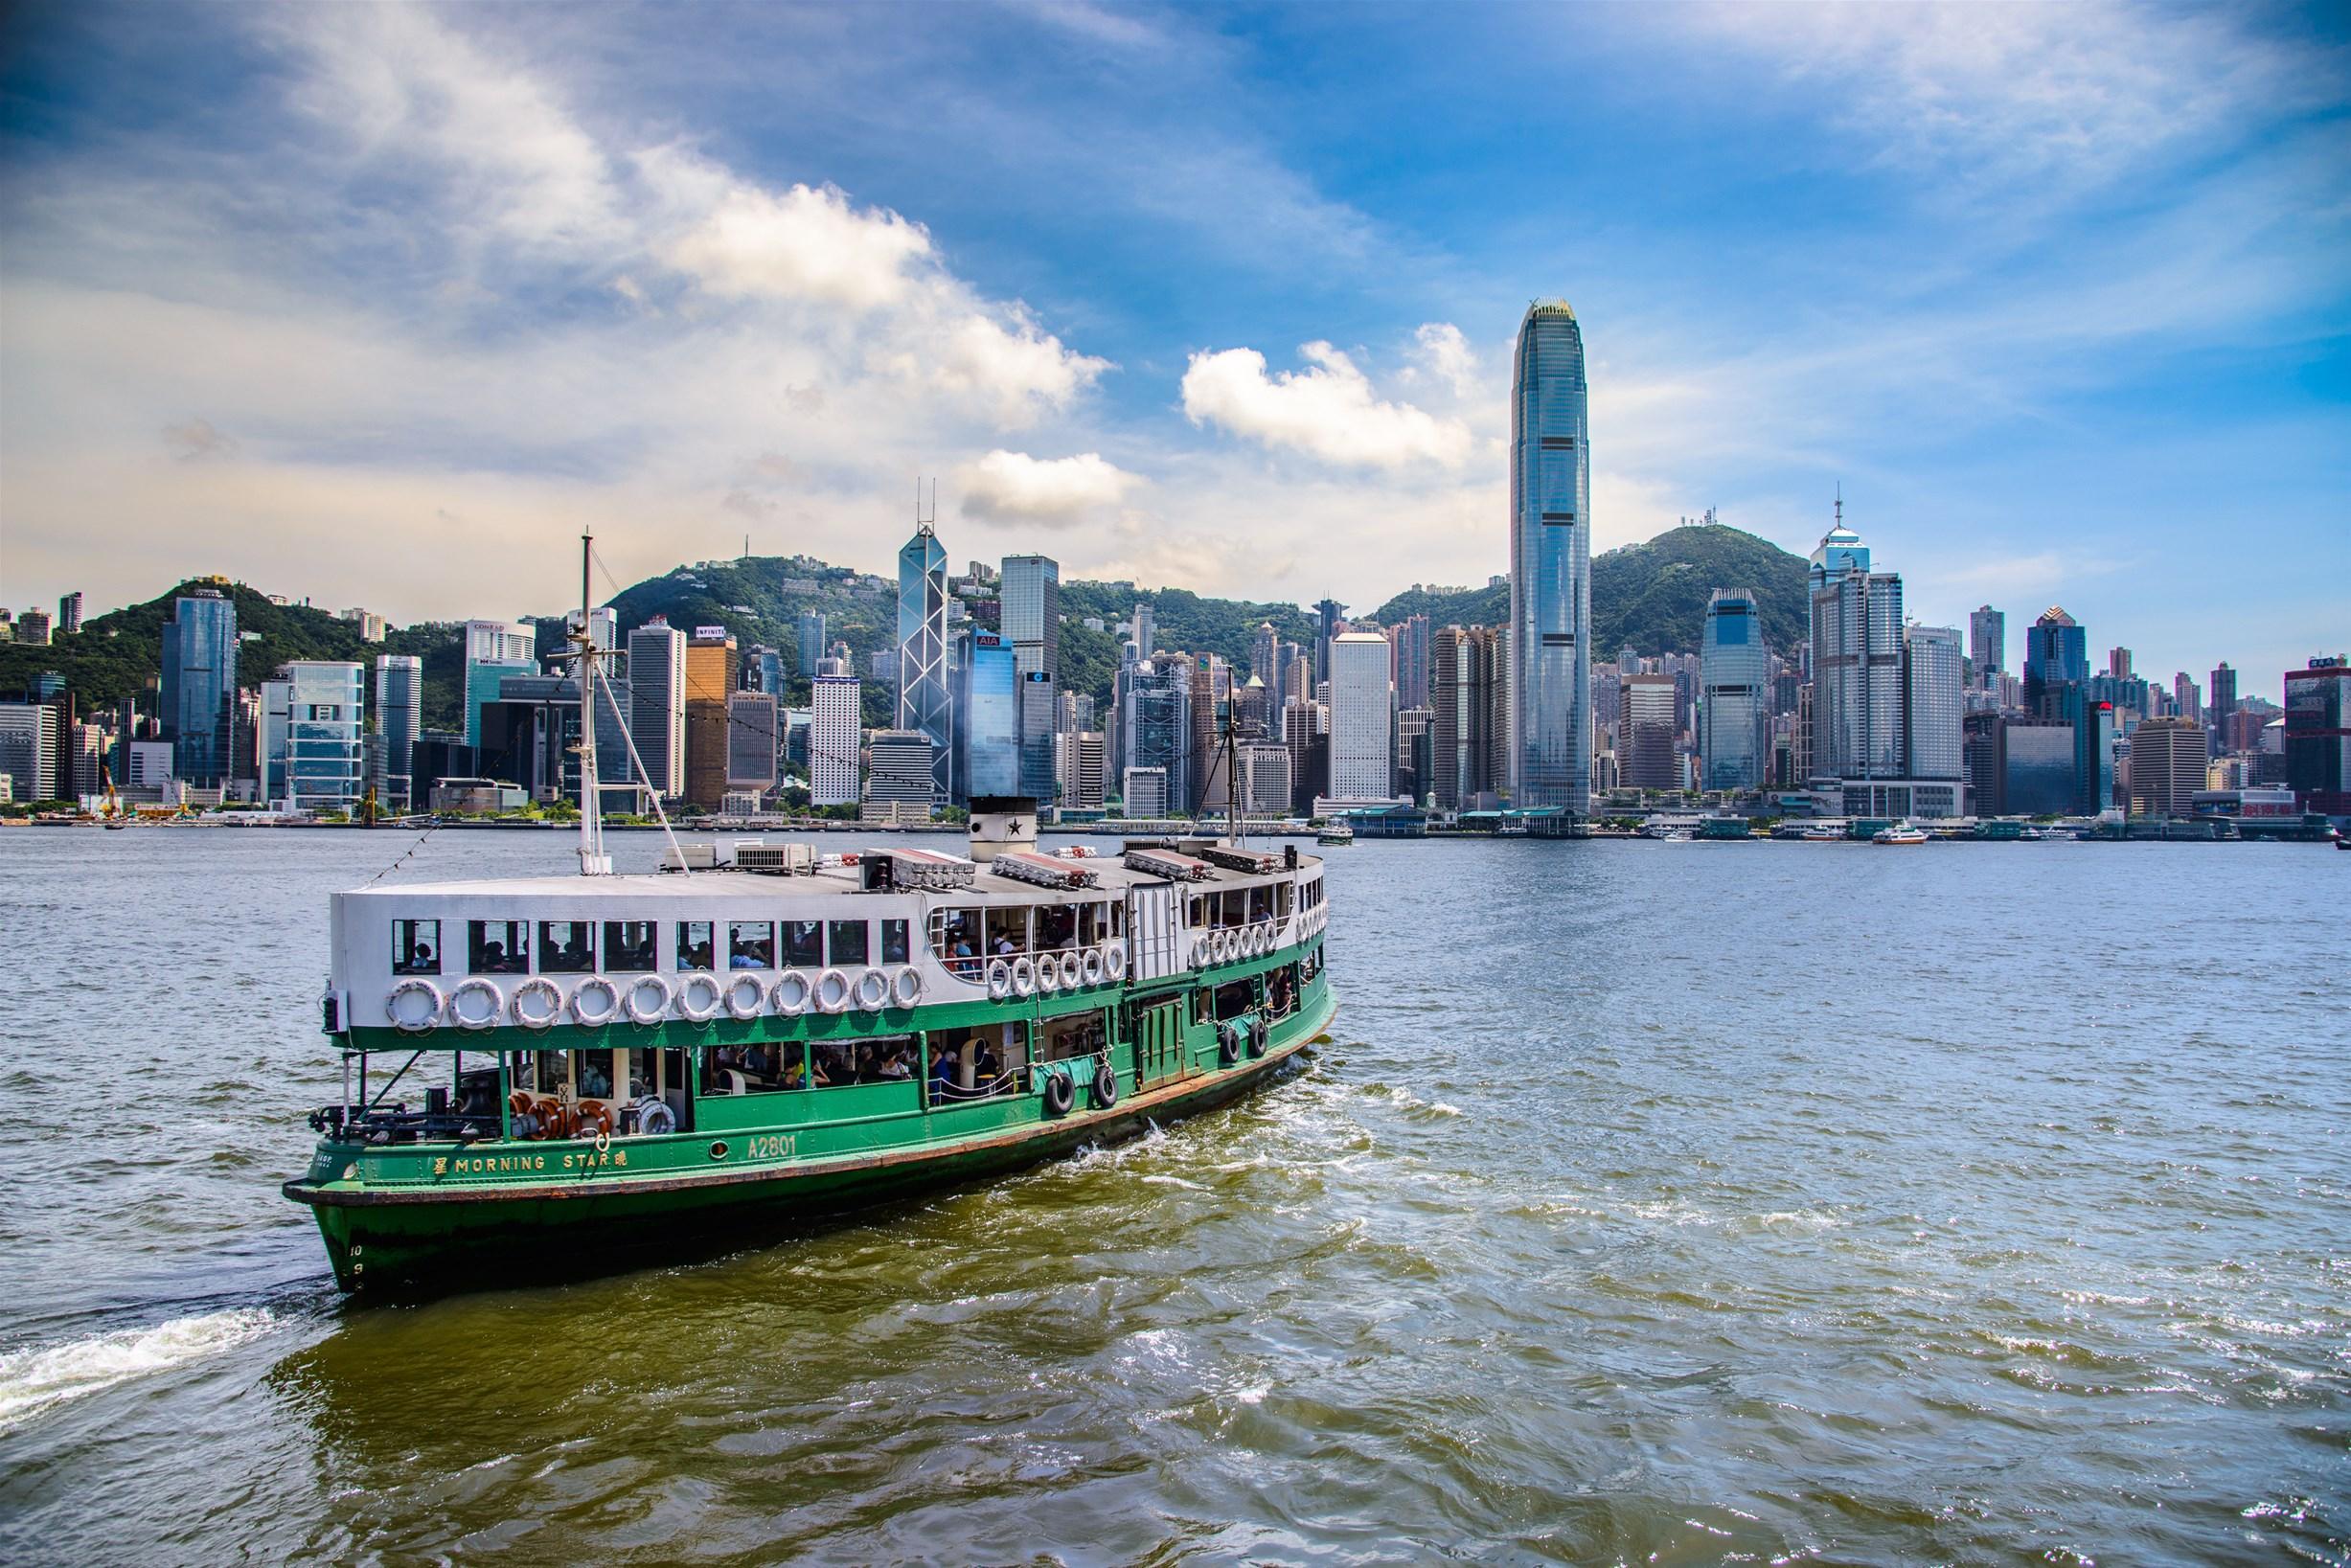 The Star Ferry is a ride that's not to be missed, offering unique city views (Hong Kong Tourism Board/discoverhongkong.com)